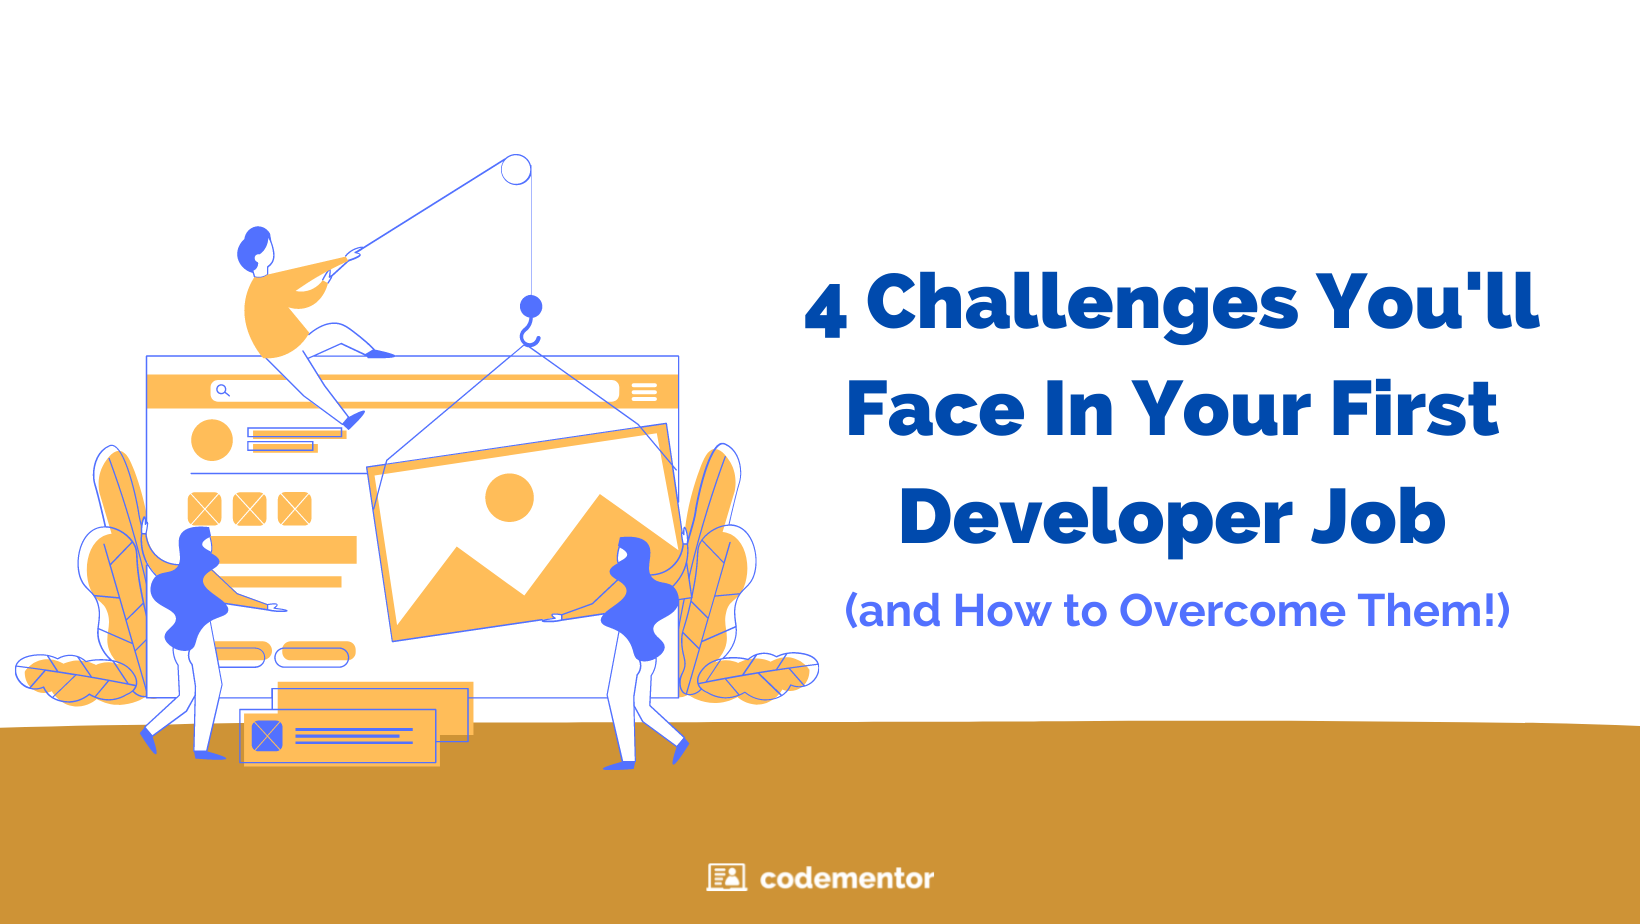 4 Challenges You Might Face in Your First Developer Job and How to Overcome Them